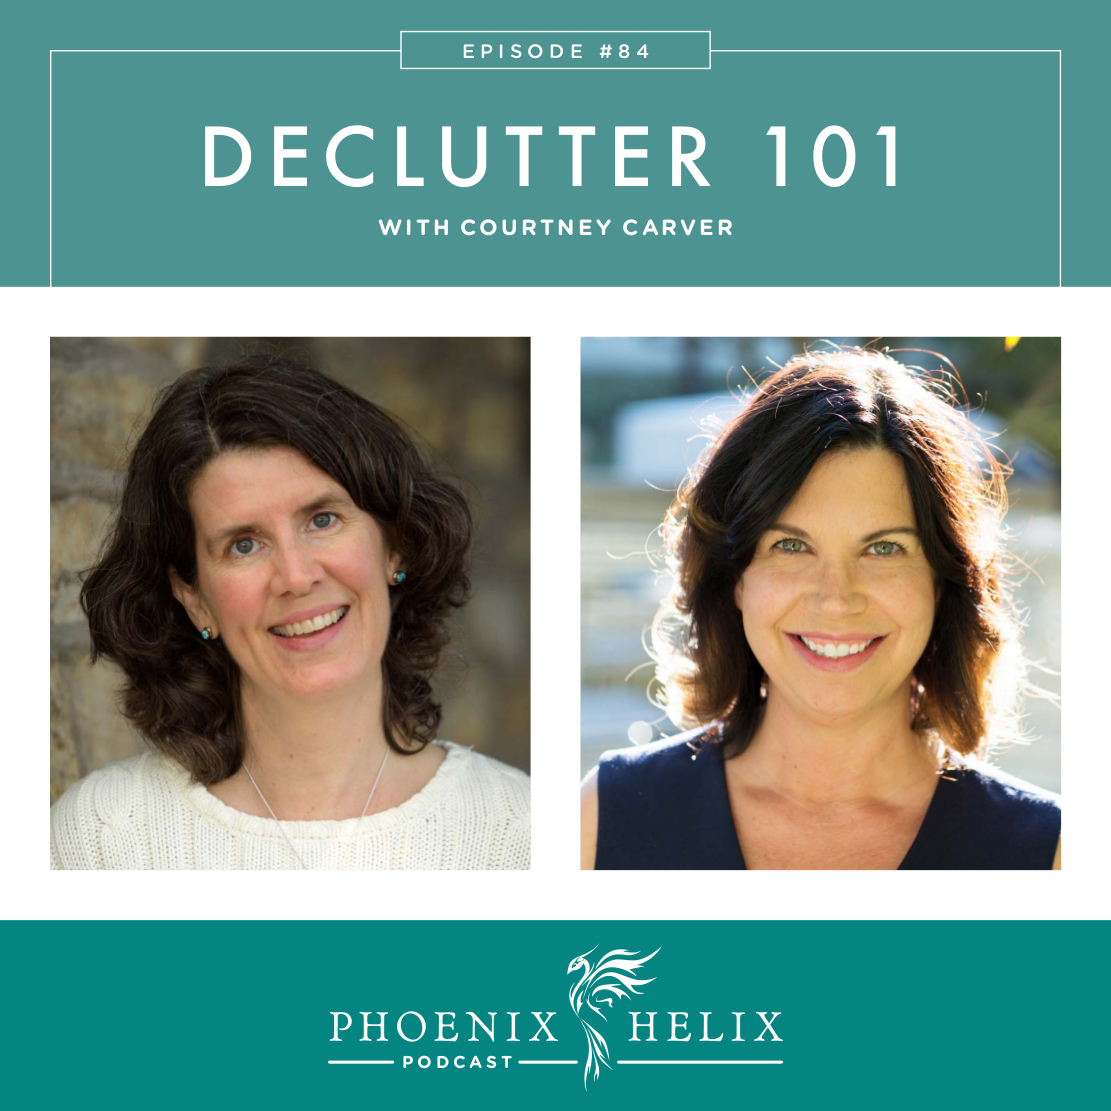 Declutter 101 with Courtney Carver | Phoenix Helix Podcast